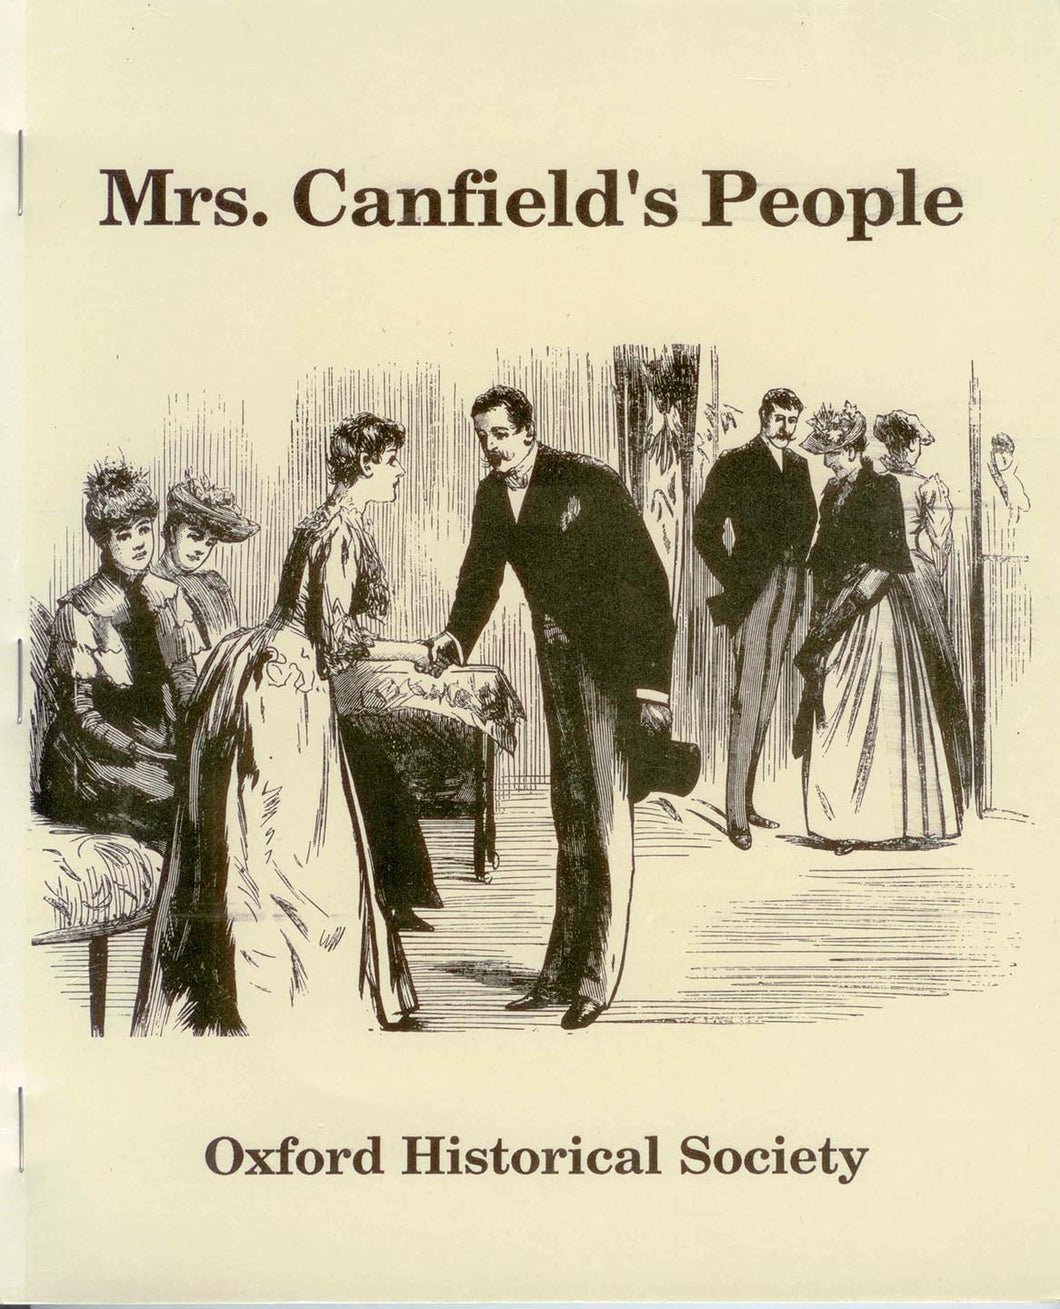 Mrs. Canfield's People